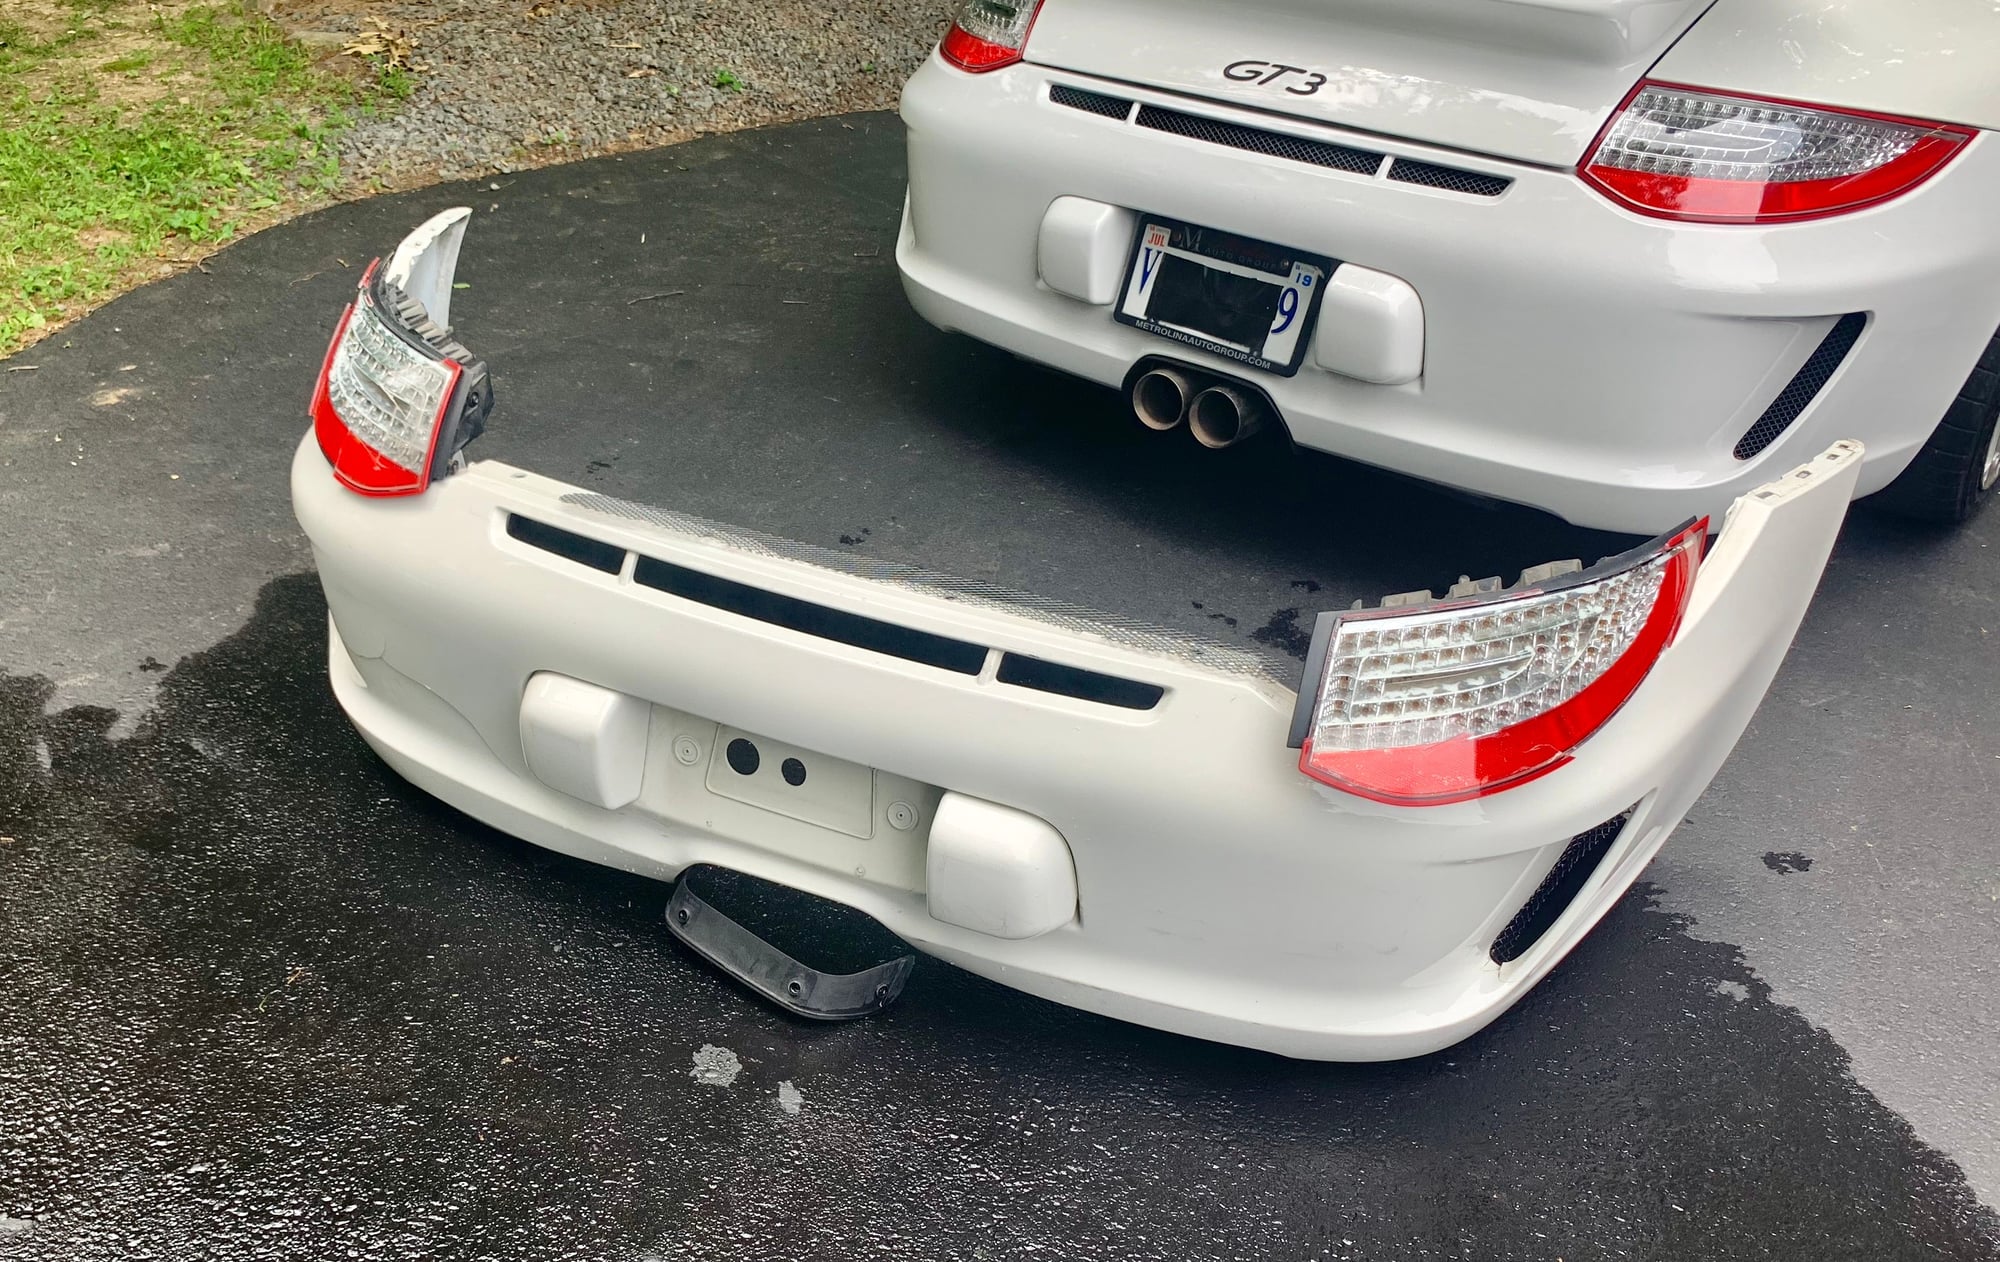 Exterior Body Parts - GT3 Rear Bumper Parts - Used - All Years Porsche GT3 - Dunn Loring, VA 22027, United States